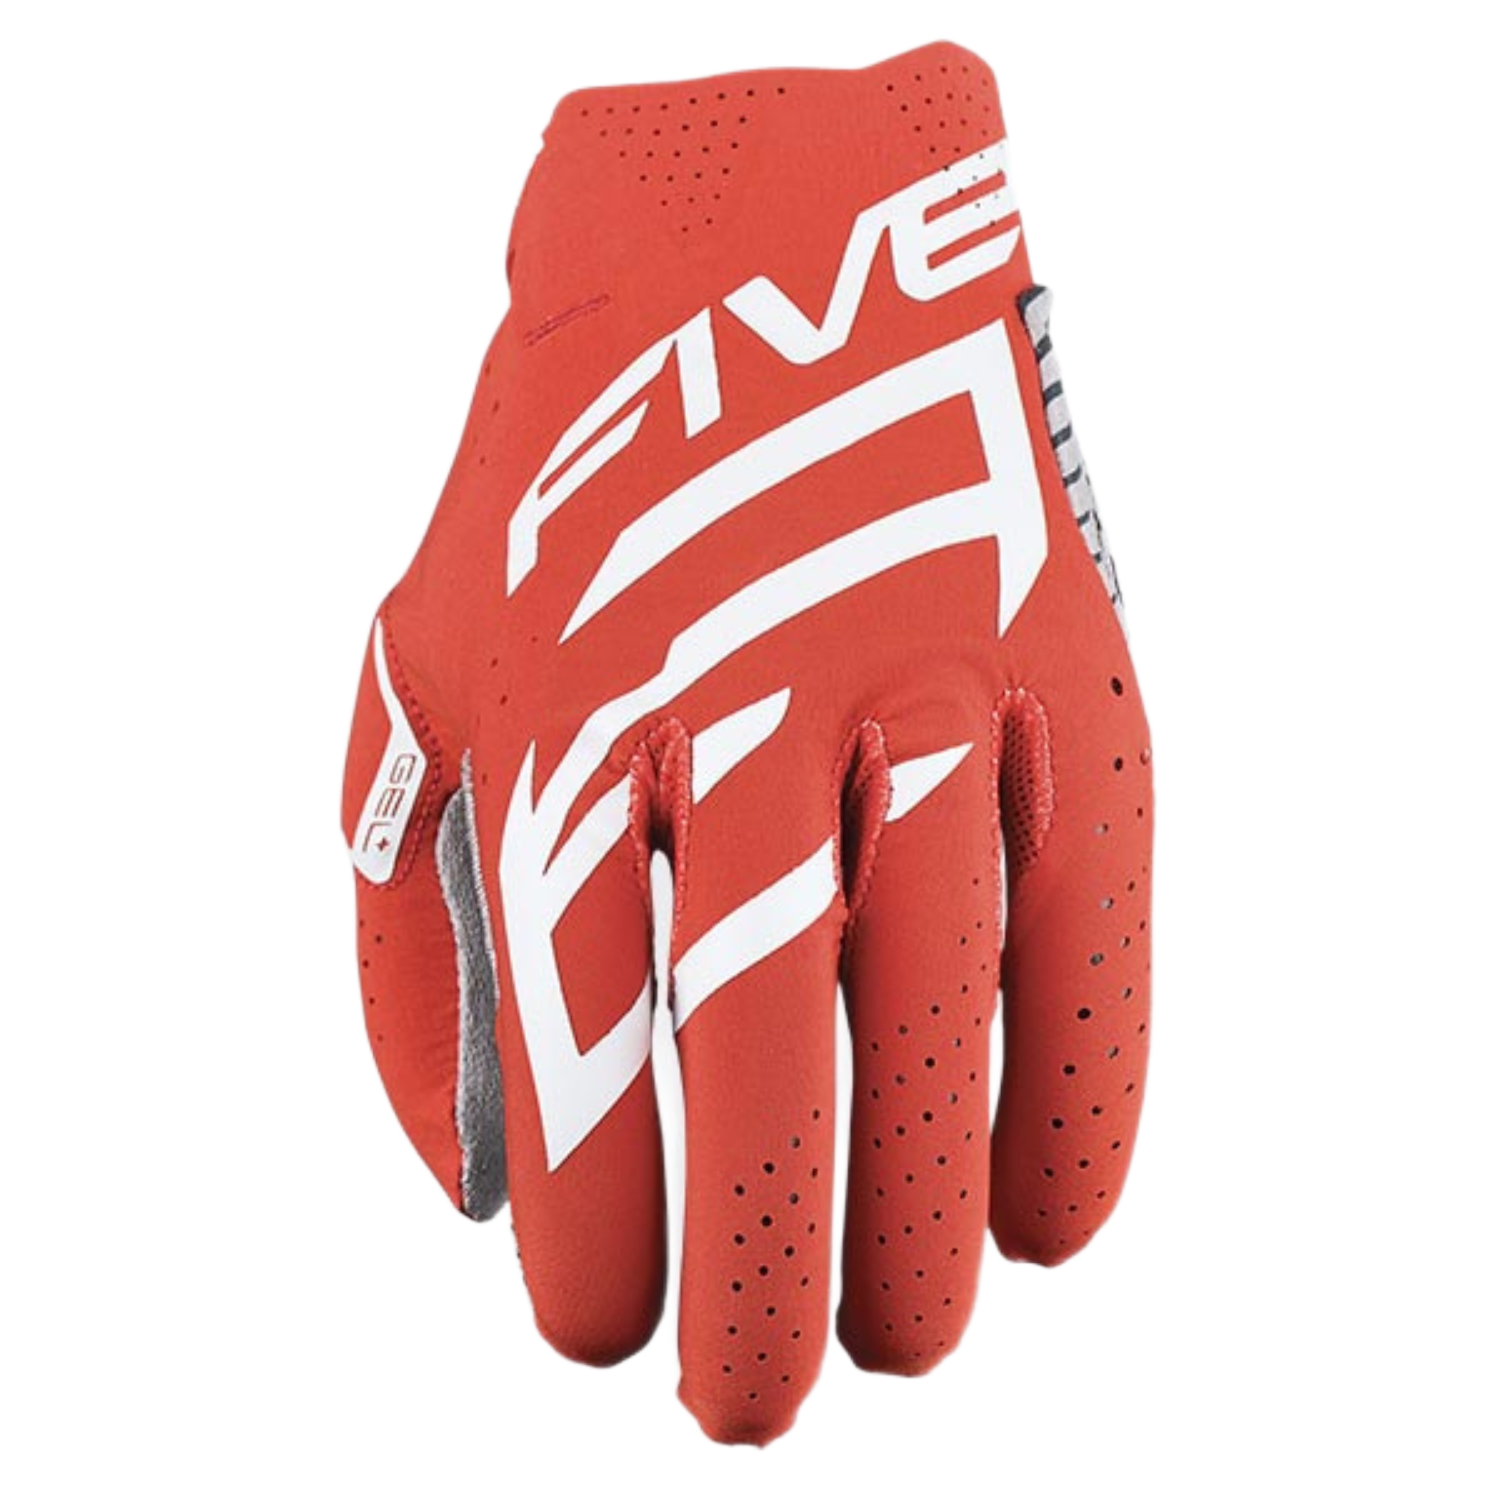 Image of Five MXF Race Gloves Red Size 3XL ID 3841300111952